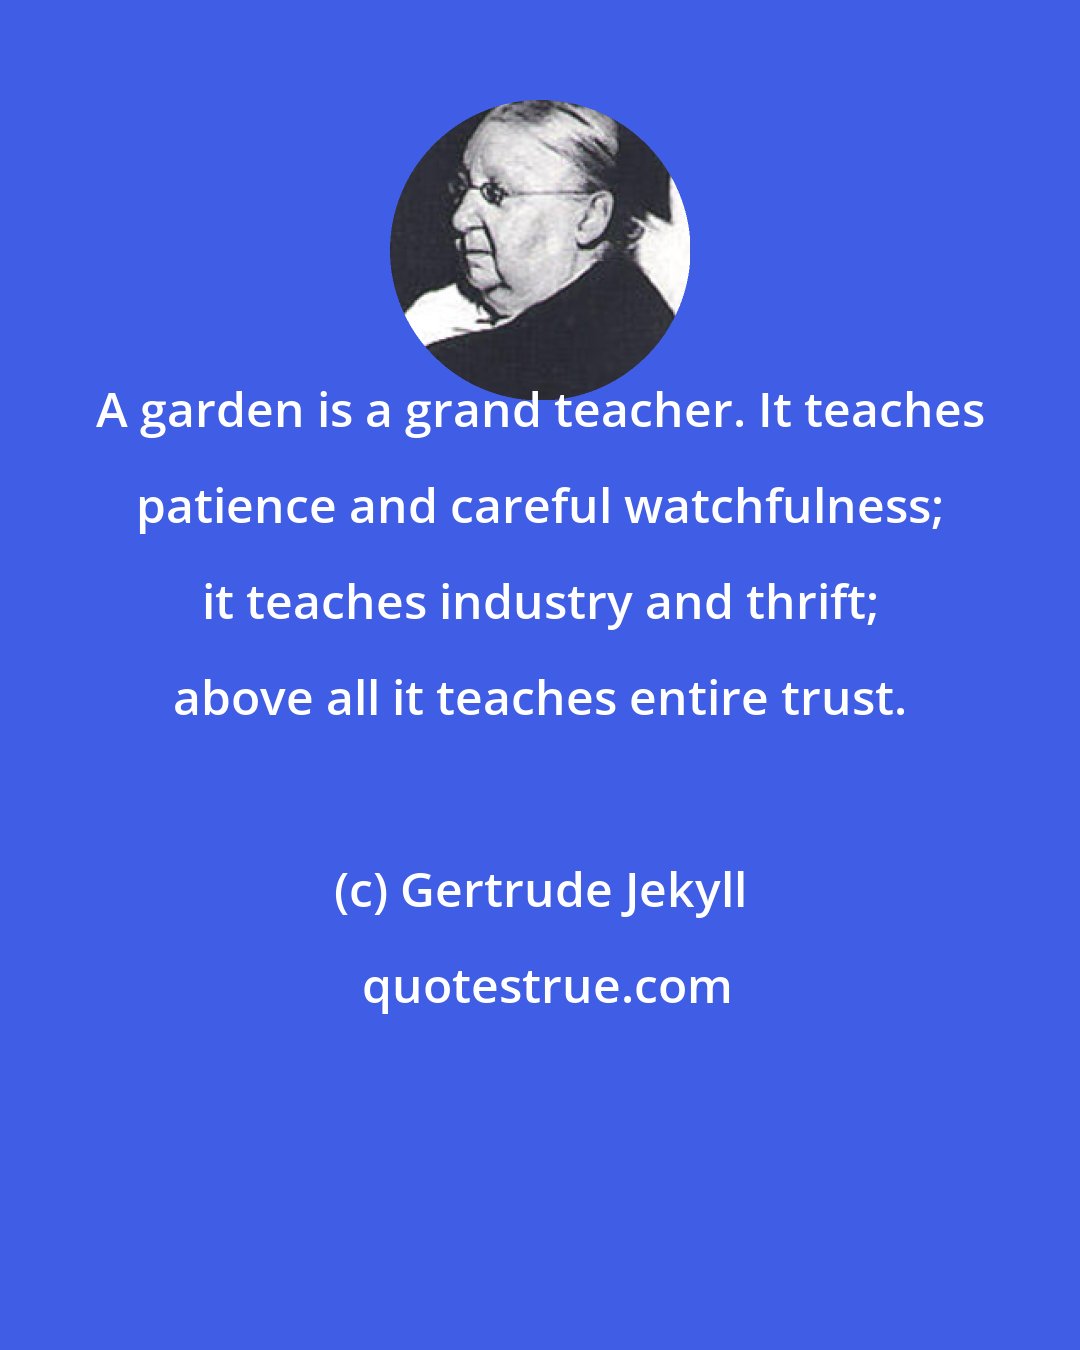 Gertrude Jekyll: A garden is a grand teacher. It teaches patience and careful watchfulness; it teaches industry and thrift; above all it teaches entire trust.